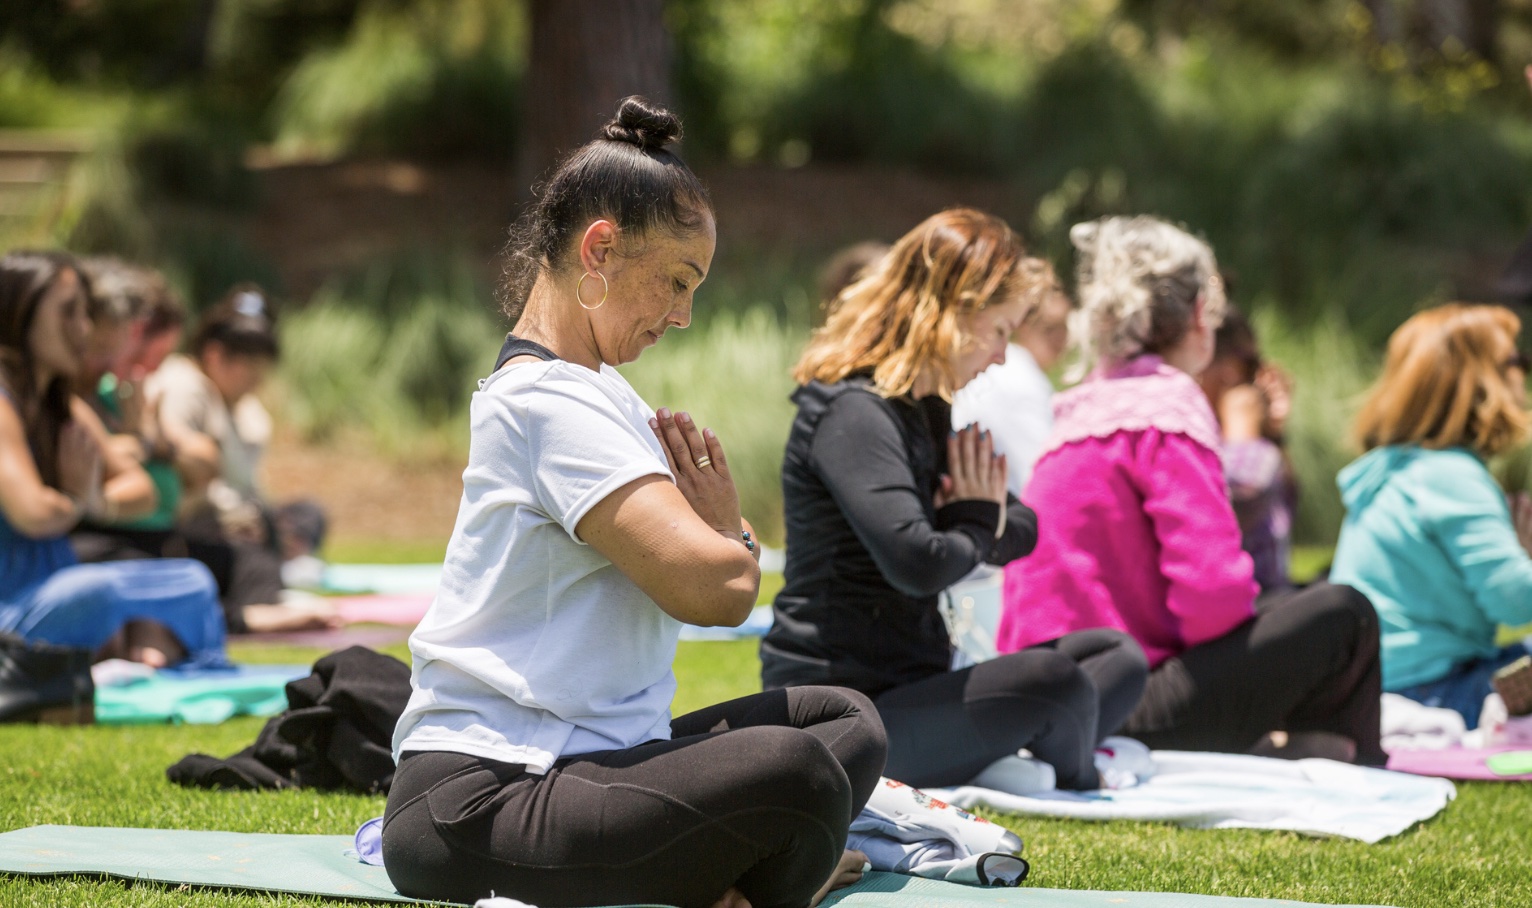 A group of event attendees sitting outdoors in the grass while performing a meditation pose